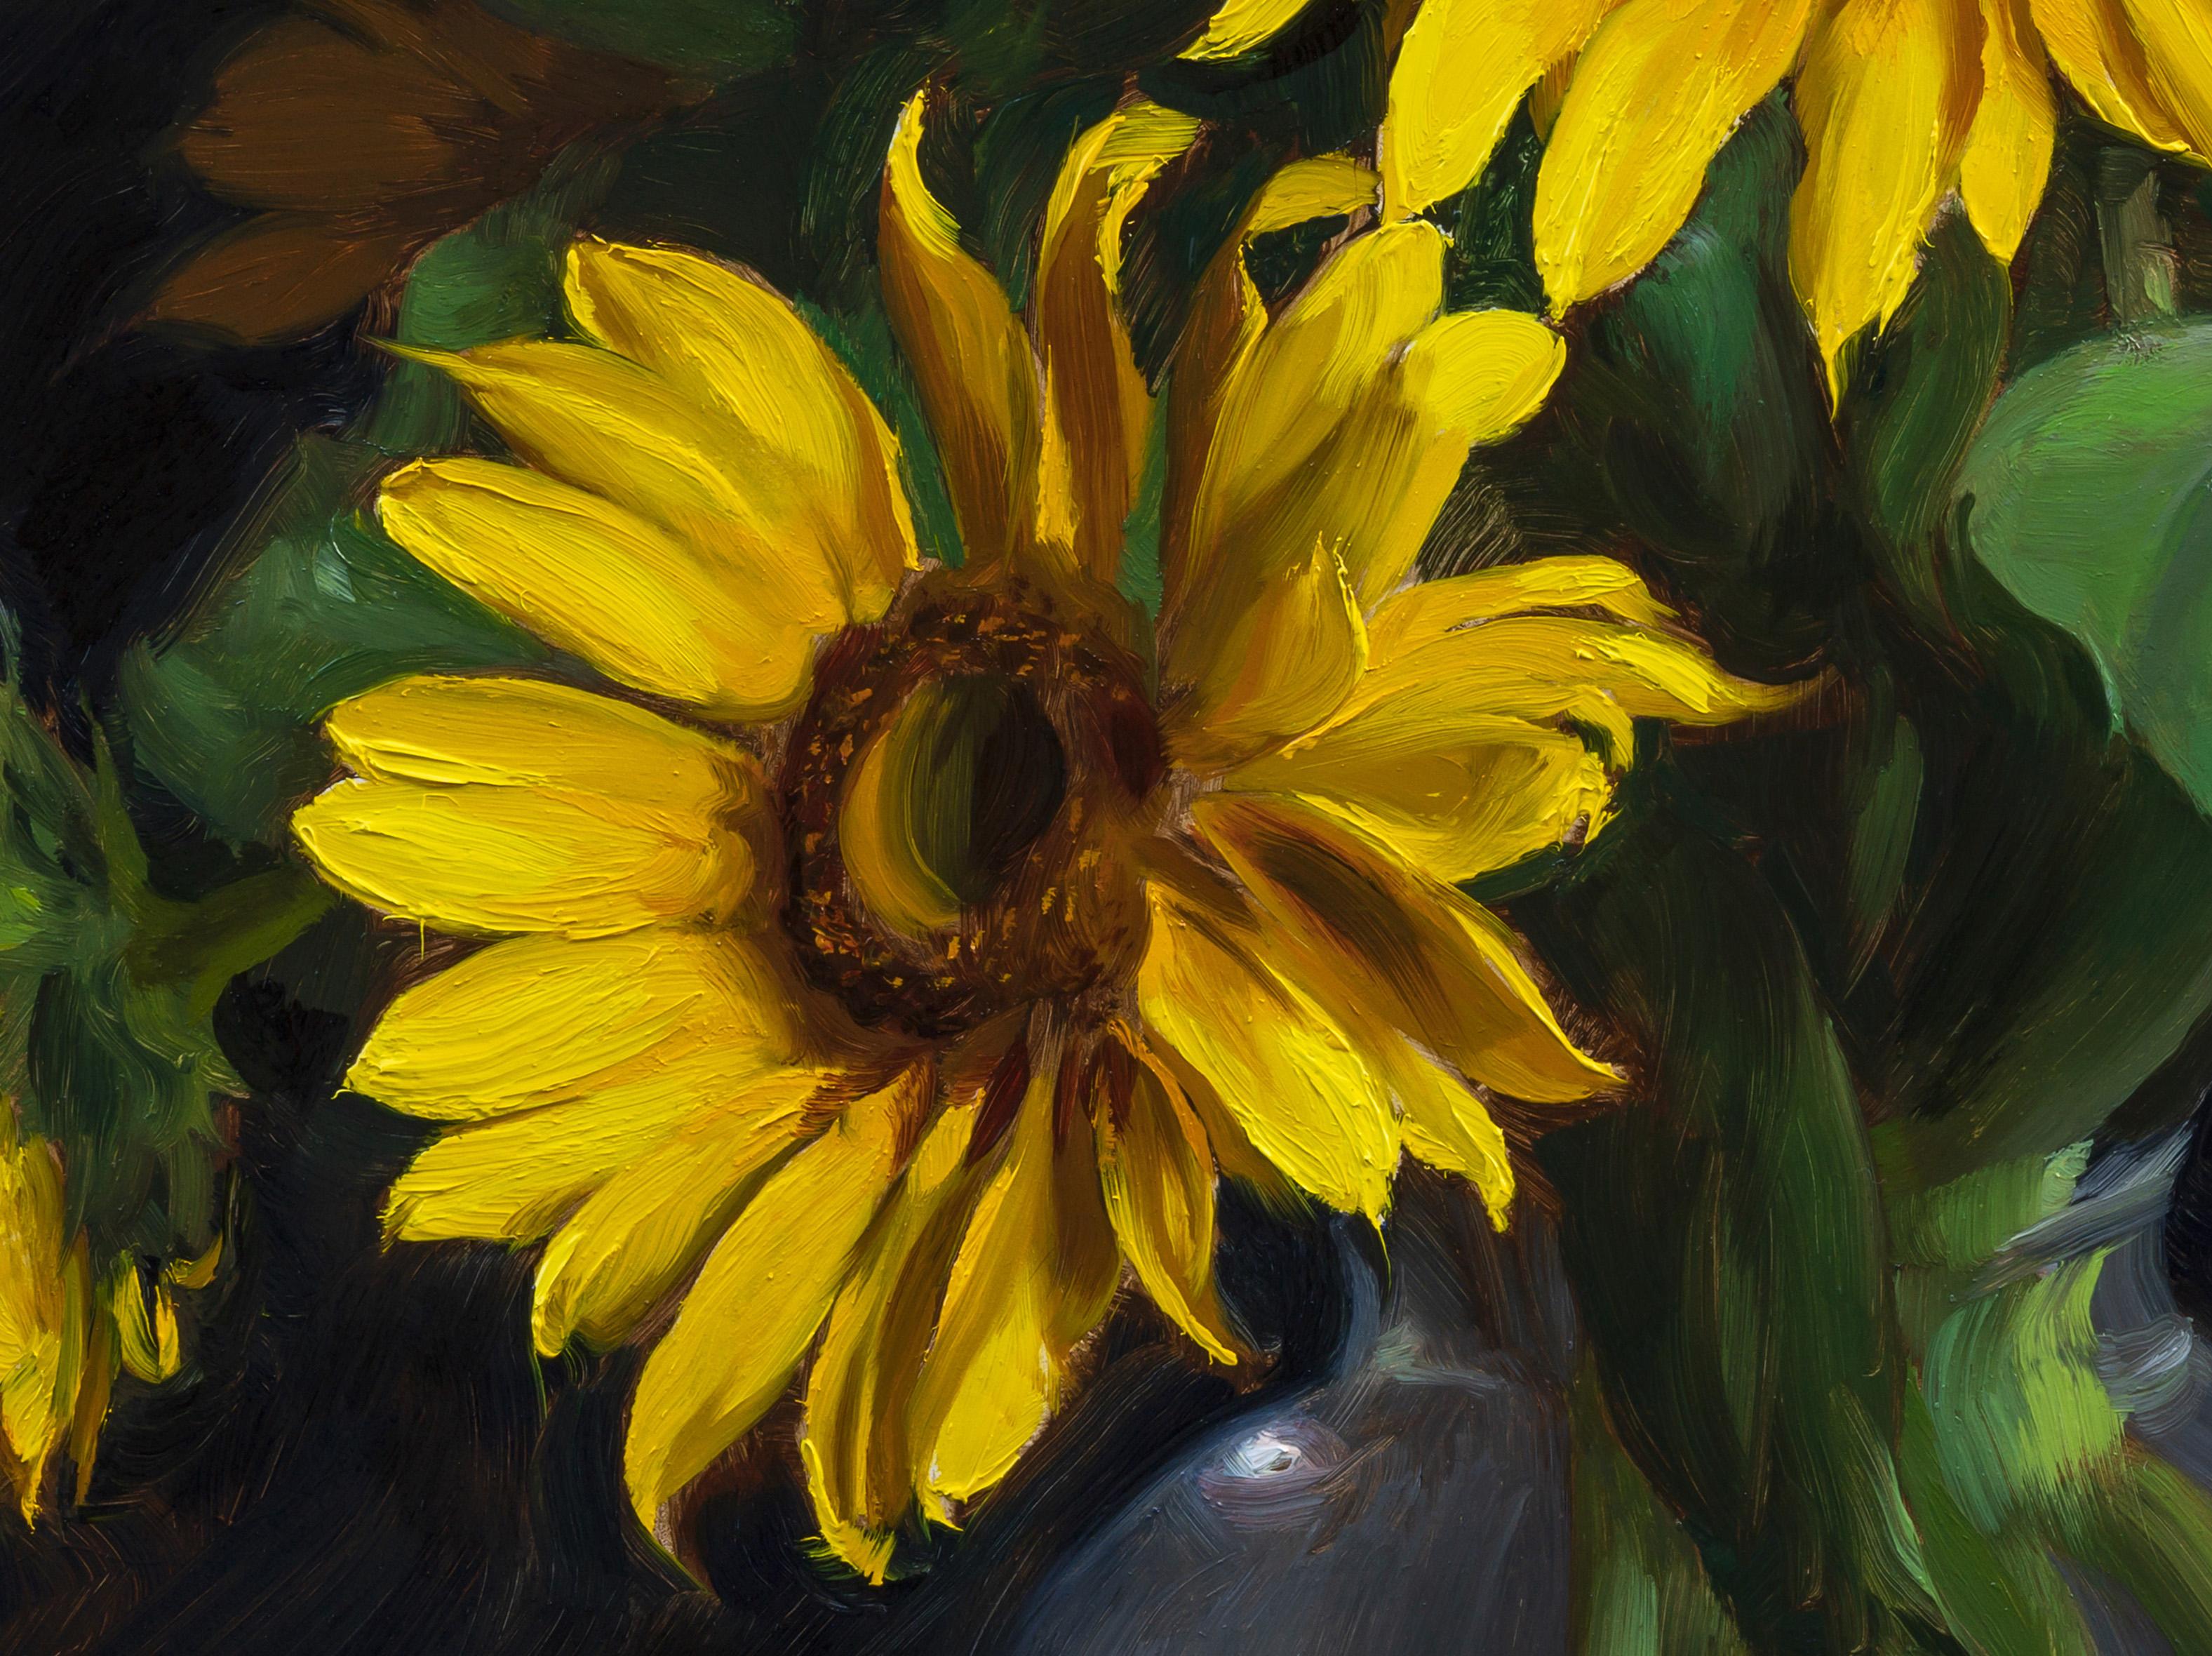 “Sunflowers” is a realist, oil on canvas painting by Joseph Q. Daily. Vibrant, golden yellow Sunflowers nearly pop off the canvas in this painting with Daily’s thick, impasto application of paint. Daily’s use of contrast between the rich yellow